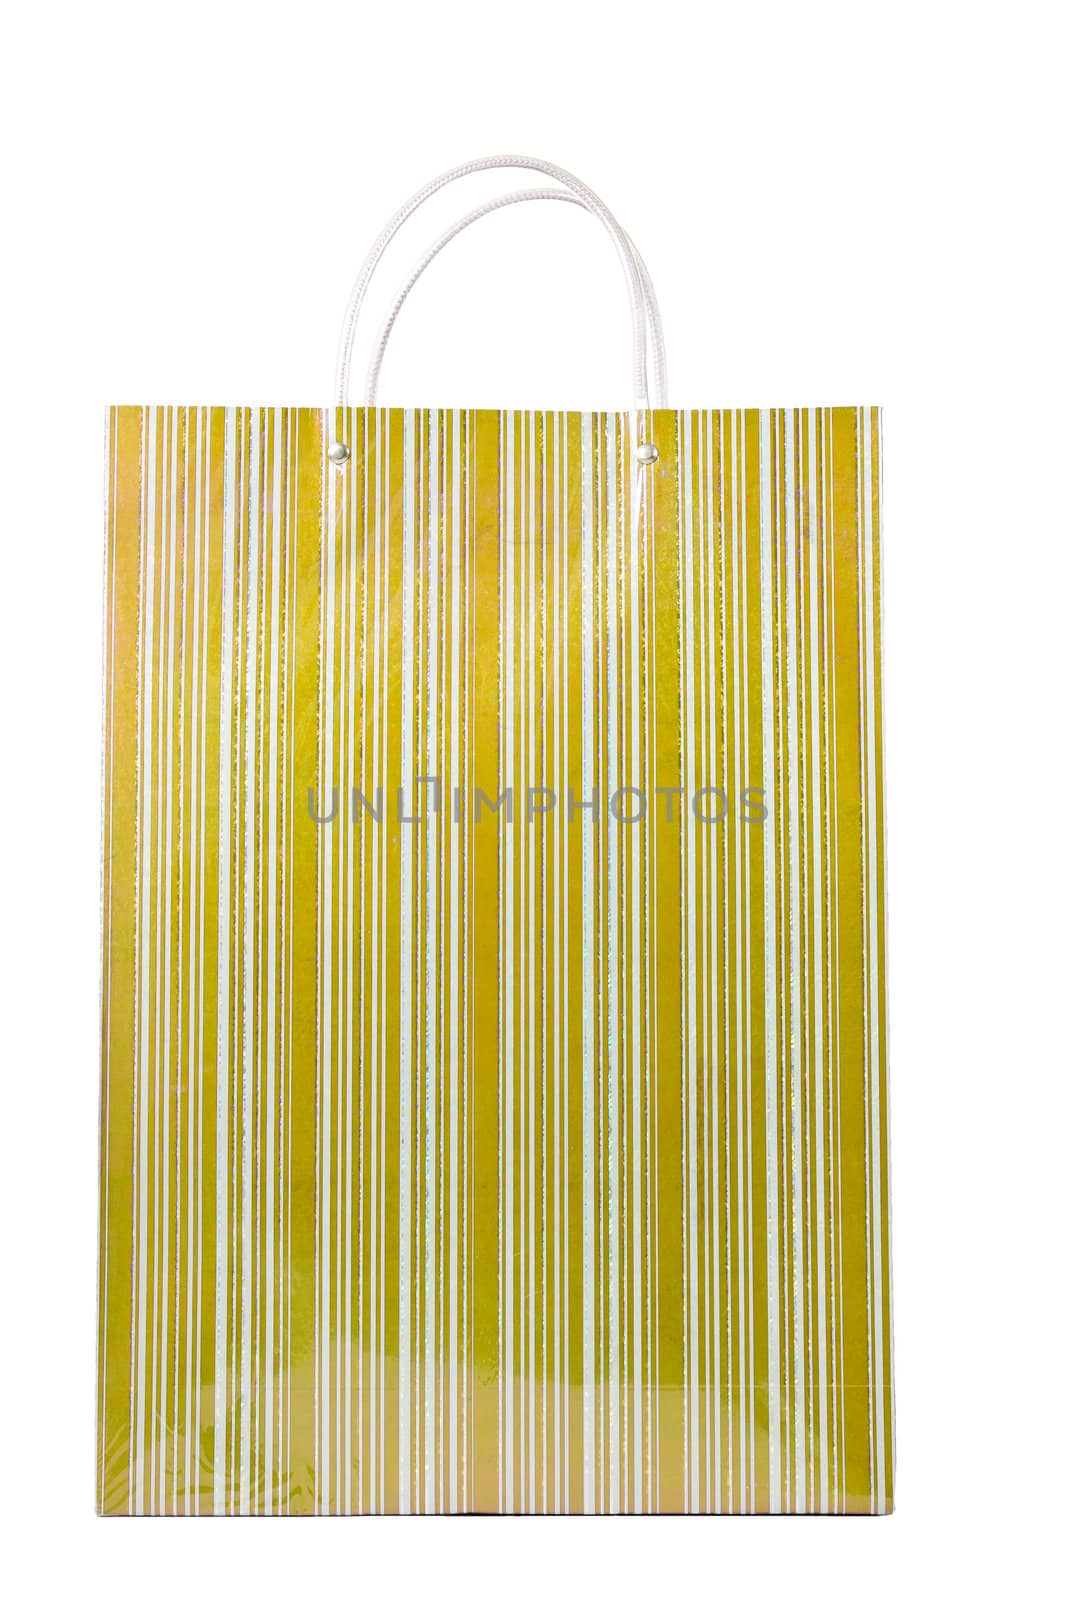 Golden shopping bag isolated over white. by Jaykayl